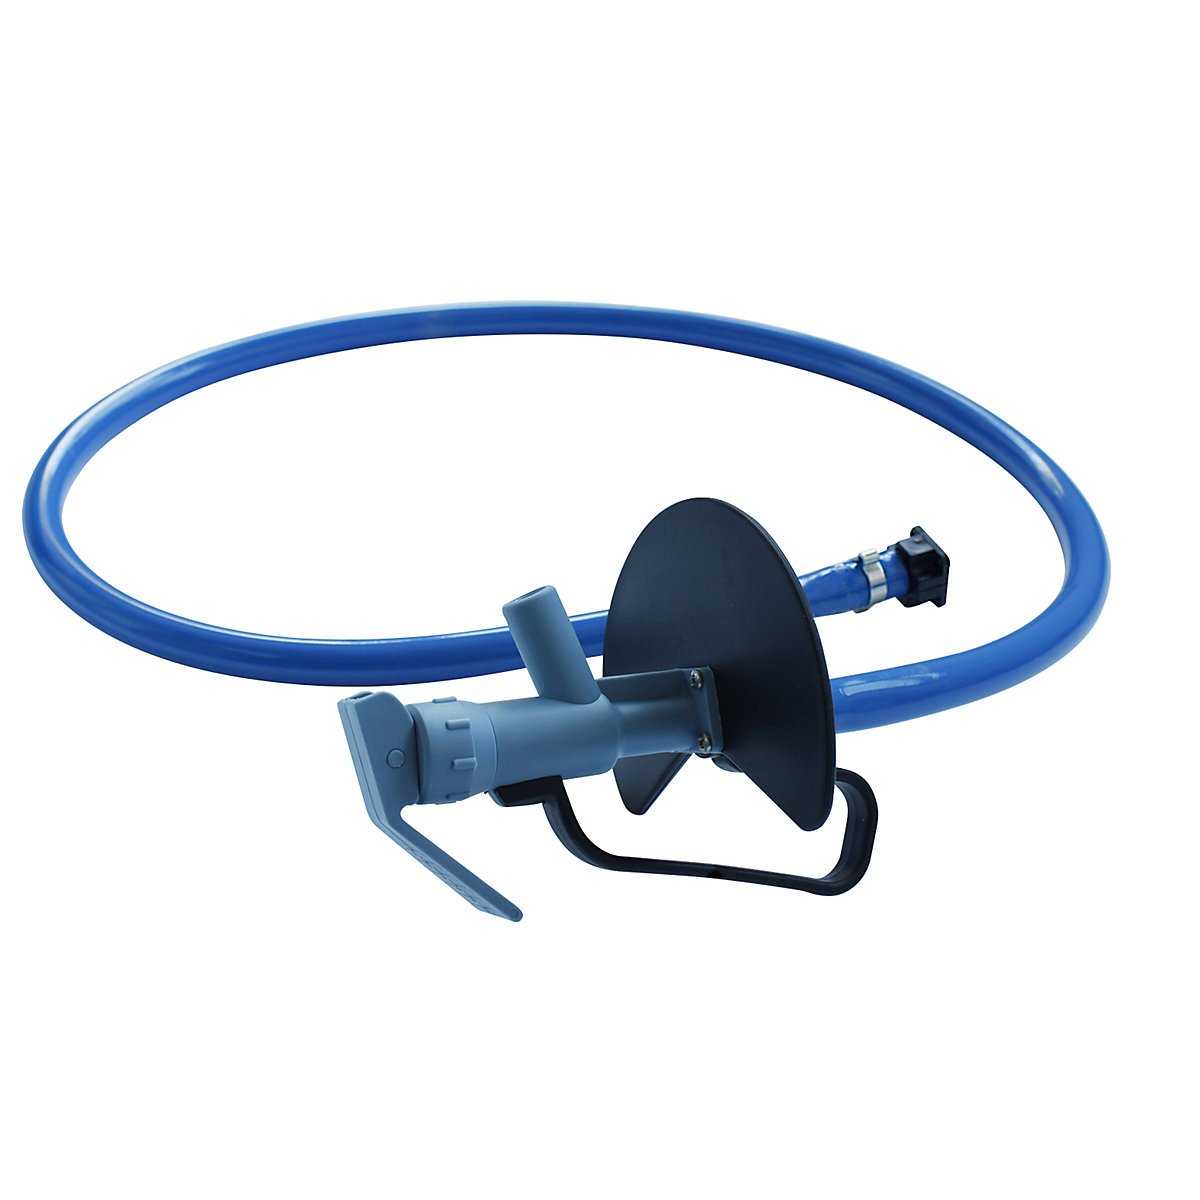 Hand pump discharge hose with tap - Jessberger